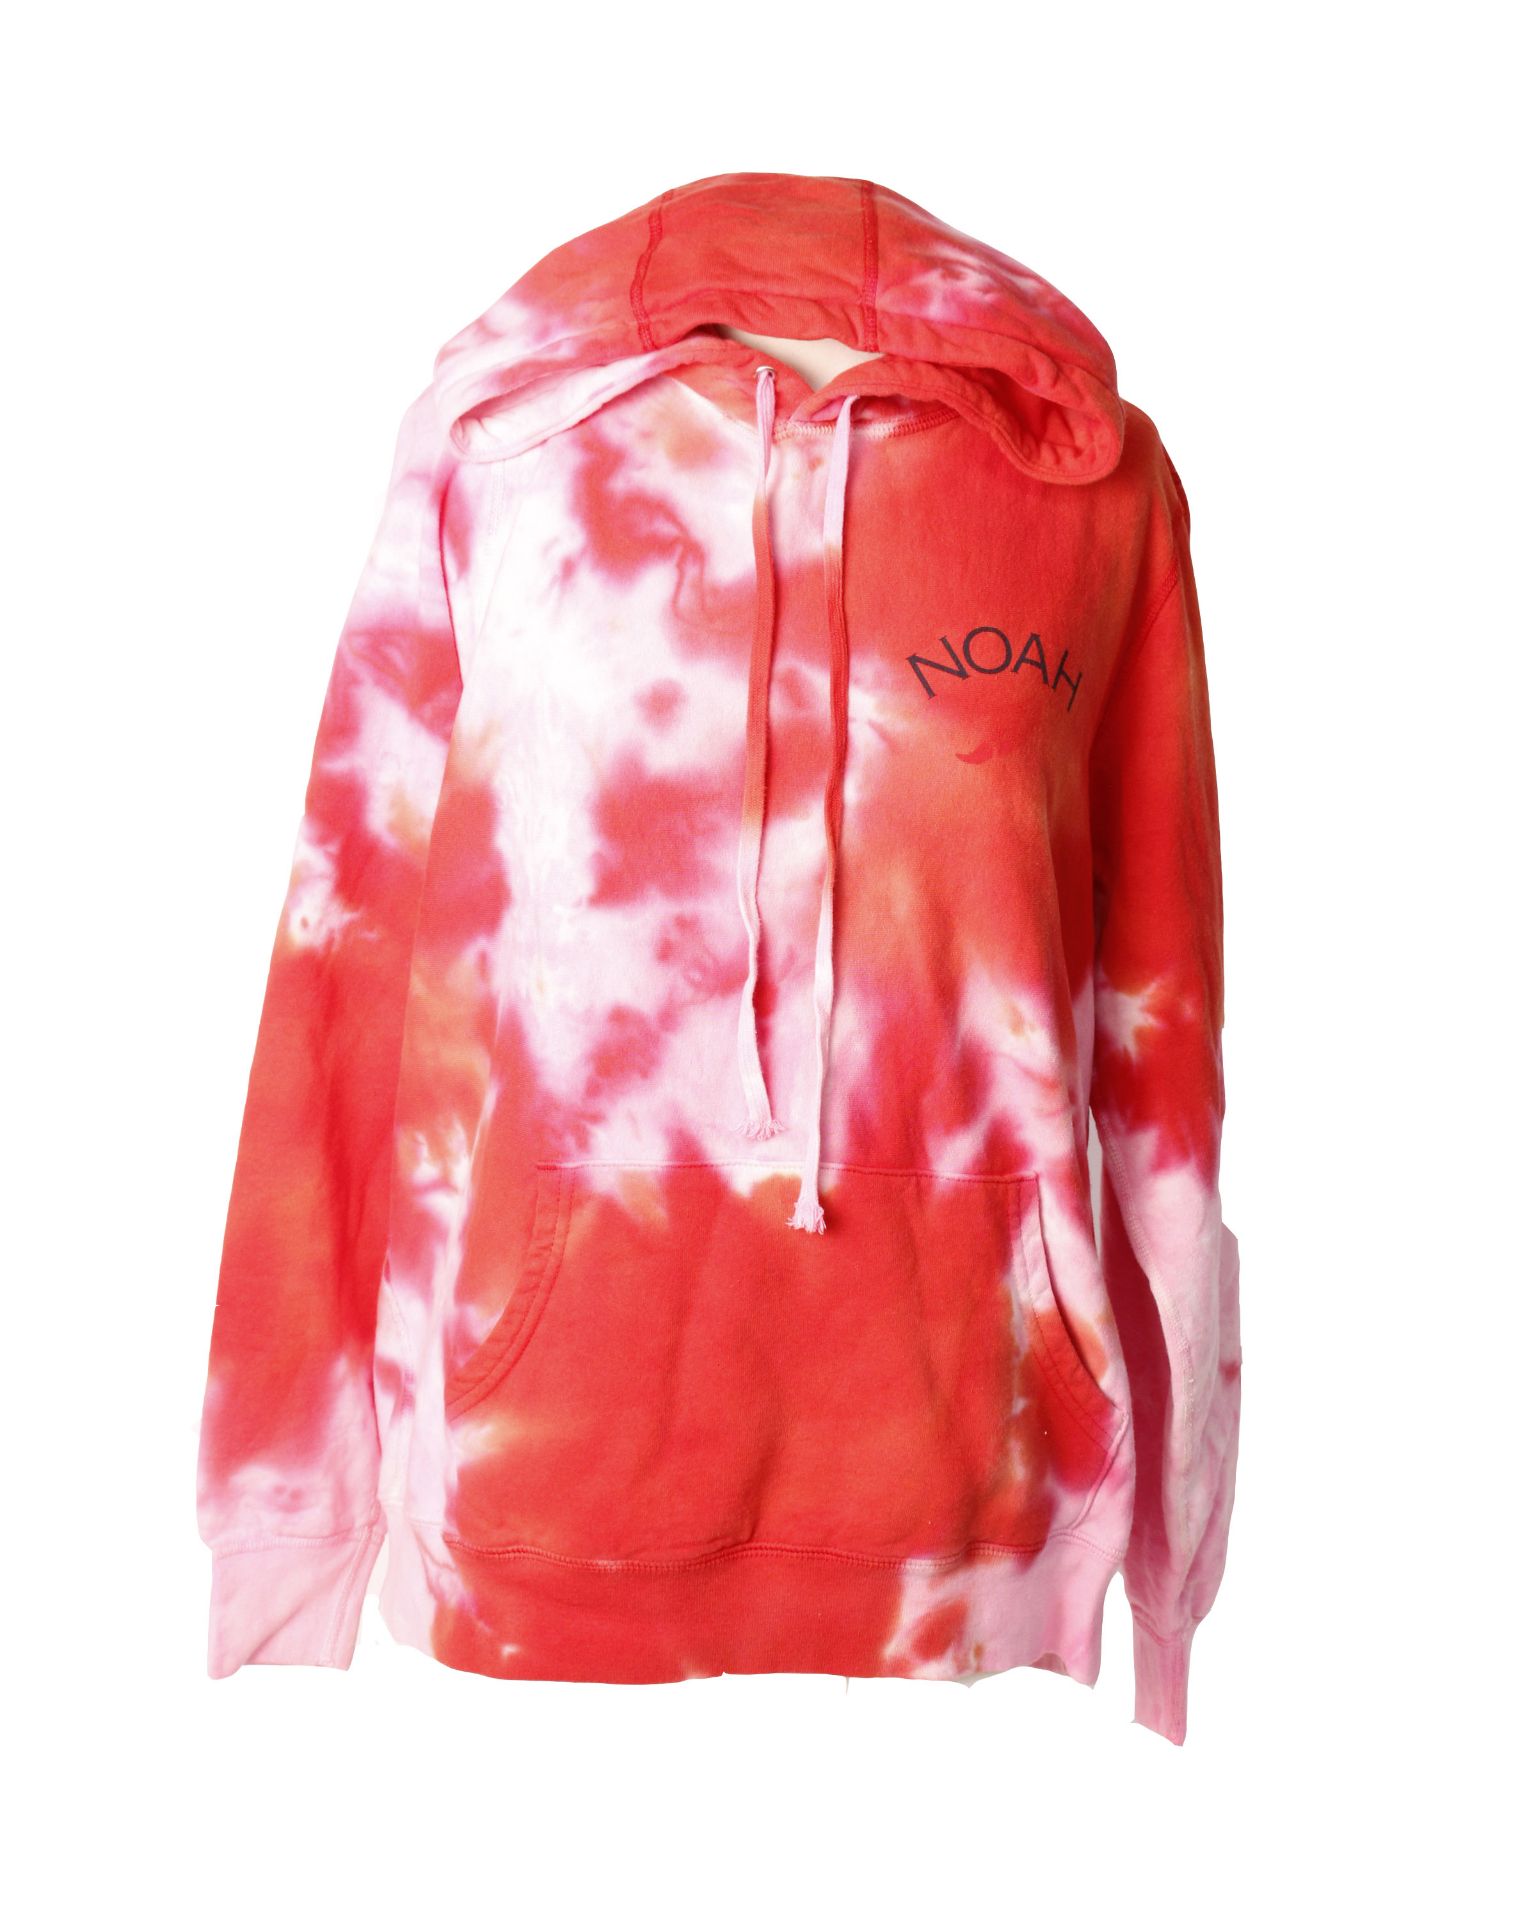 One as new Noah Sun Dyed Winged Foot hoodie in red (L).